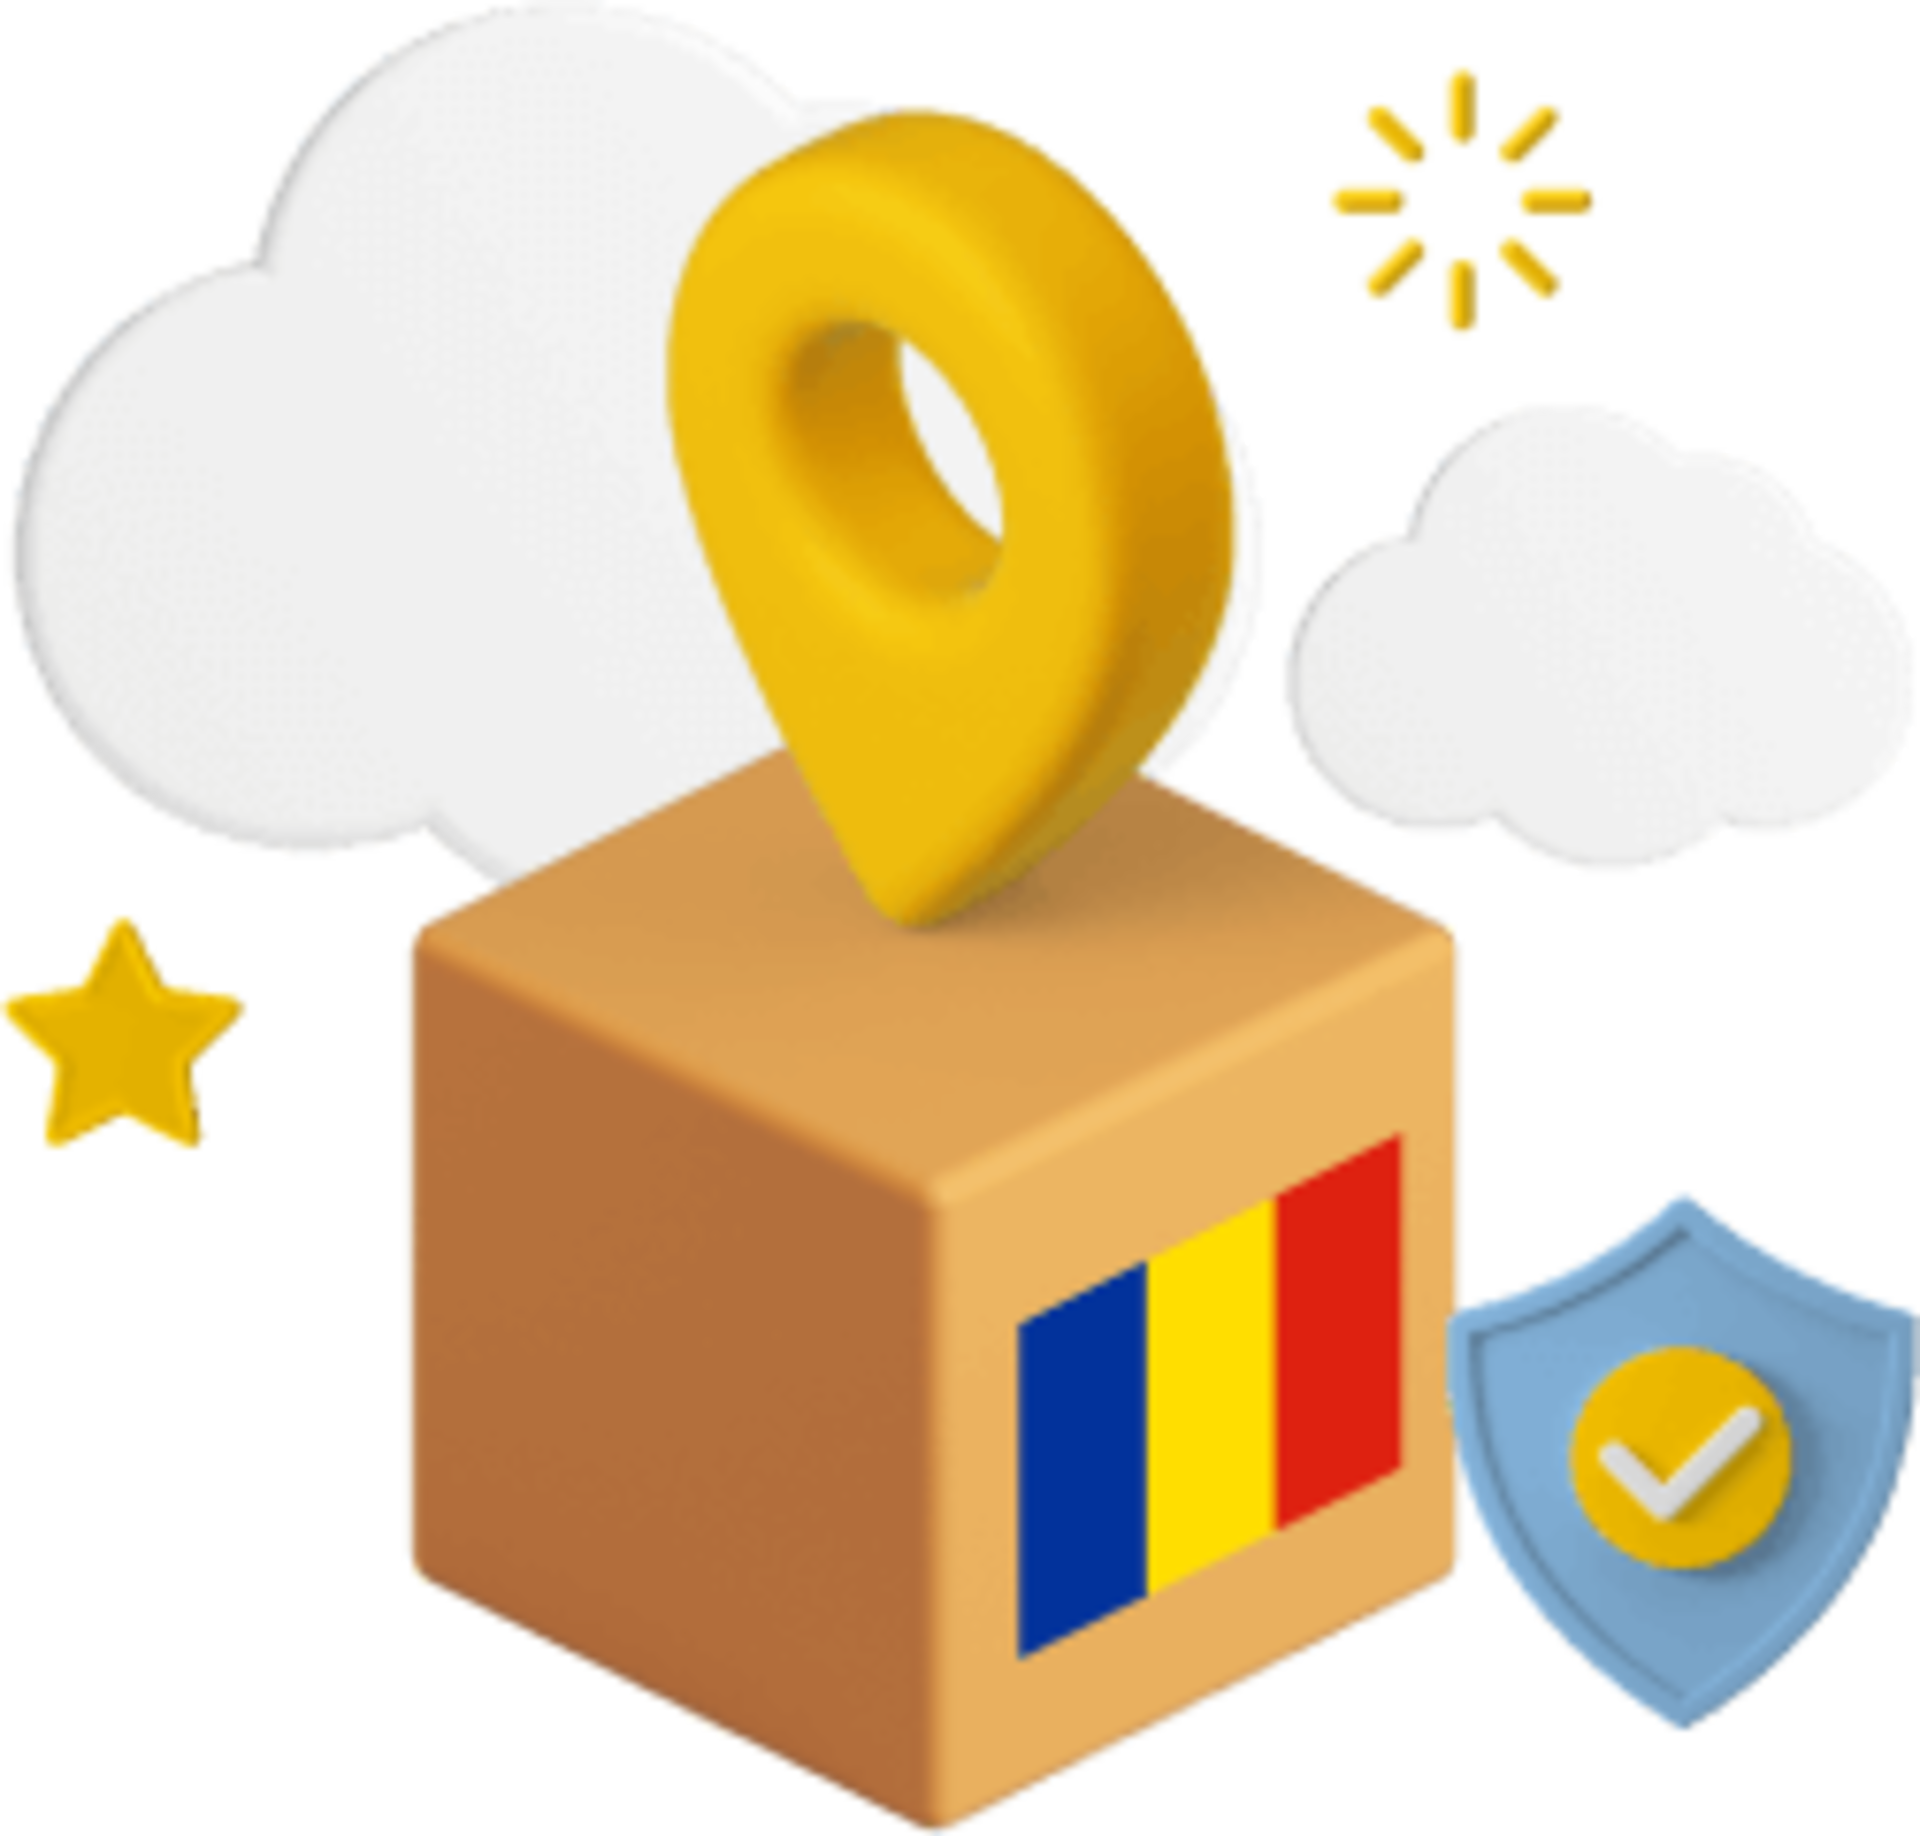 Box with Romanian flag on